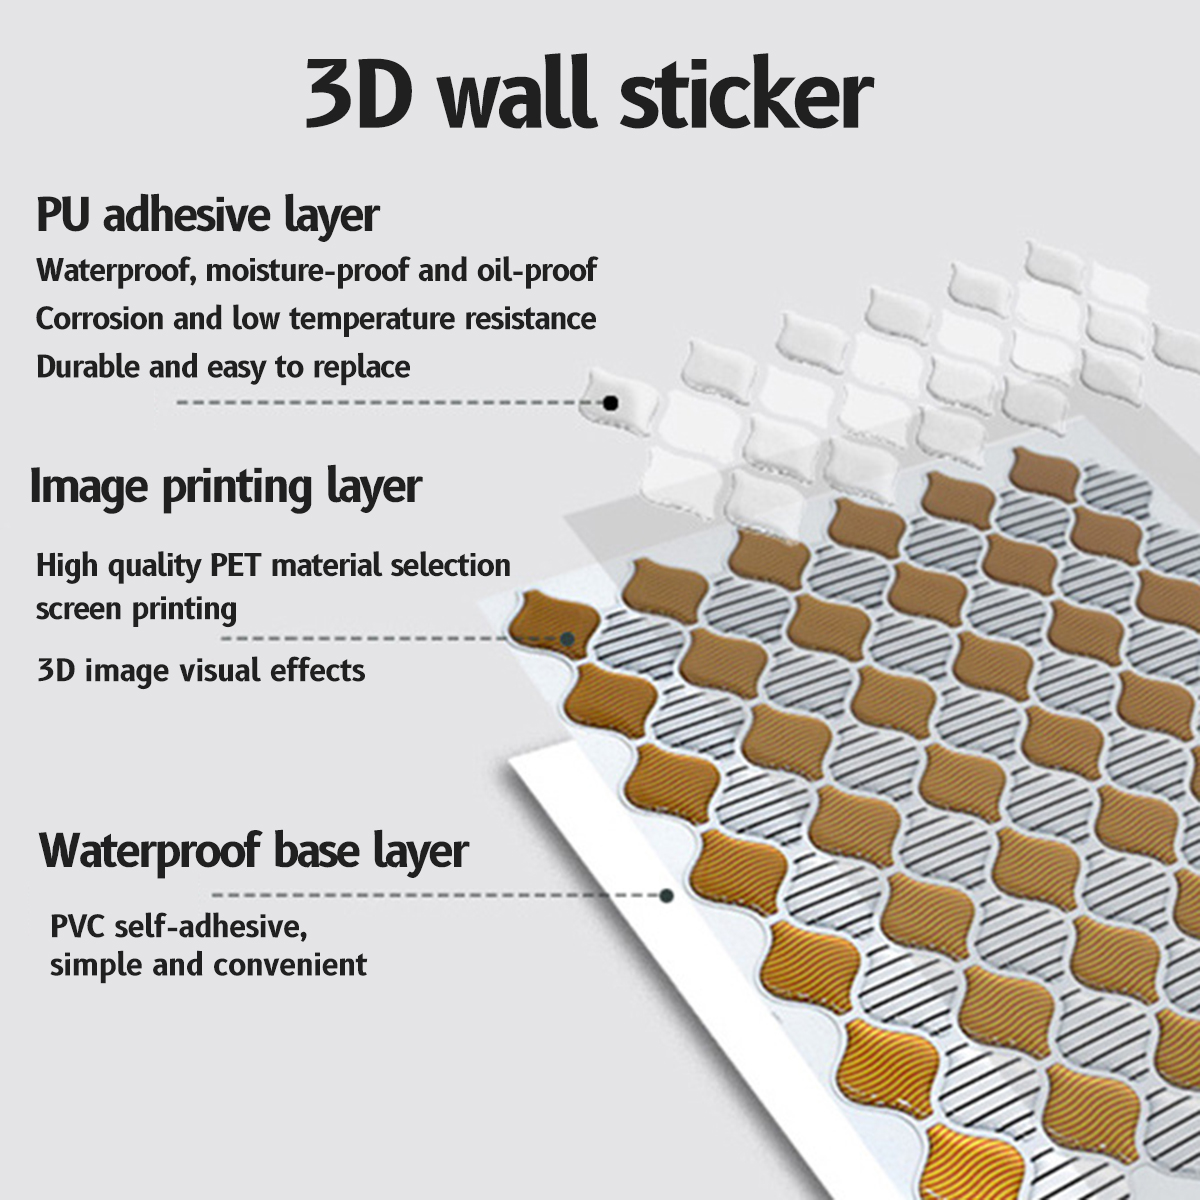 3D-Wall-Sticker-Waterproof-Wall-Tile-Decal-Kitchen-Home-Living-Room-DIY-Decoration-213x25cm-1824204-2